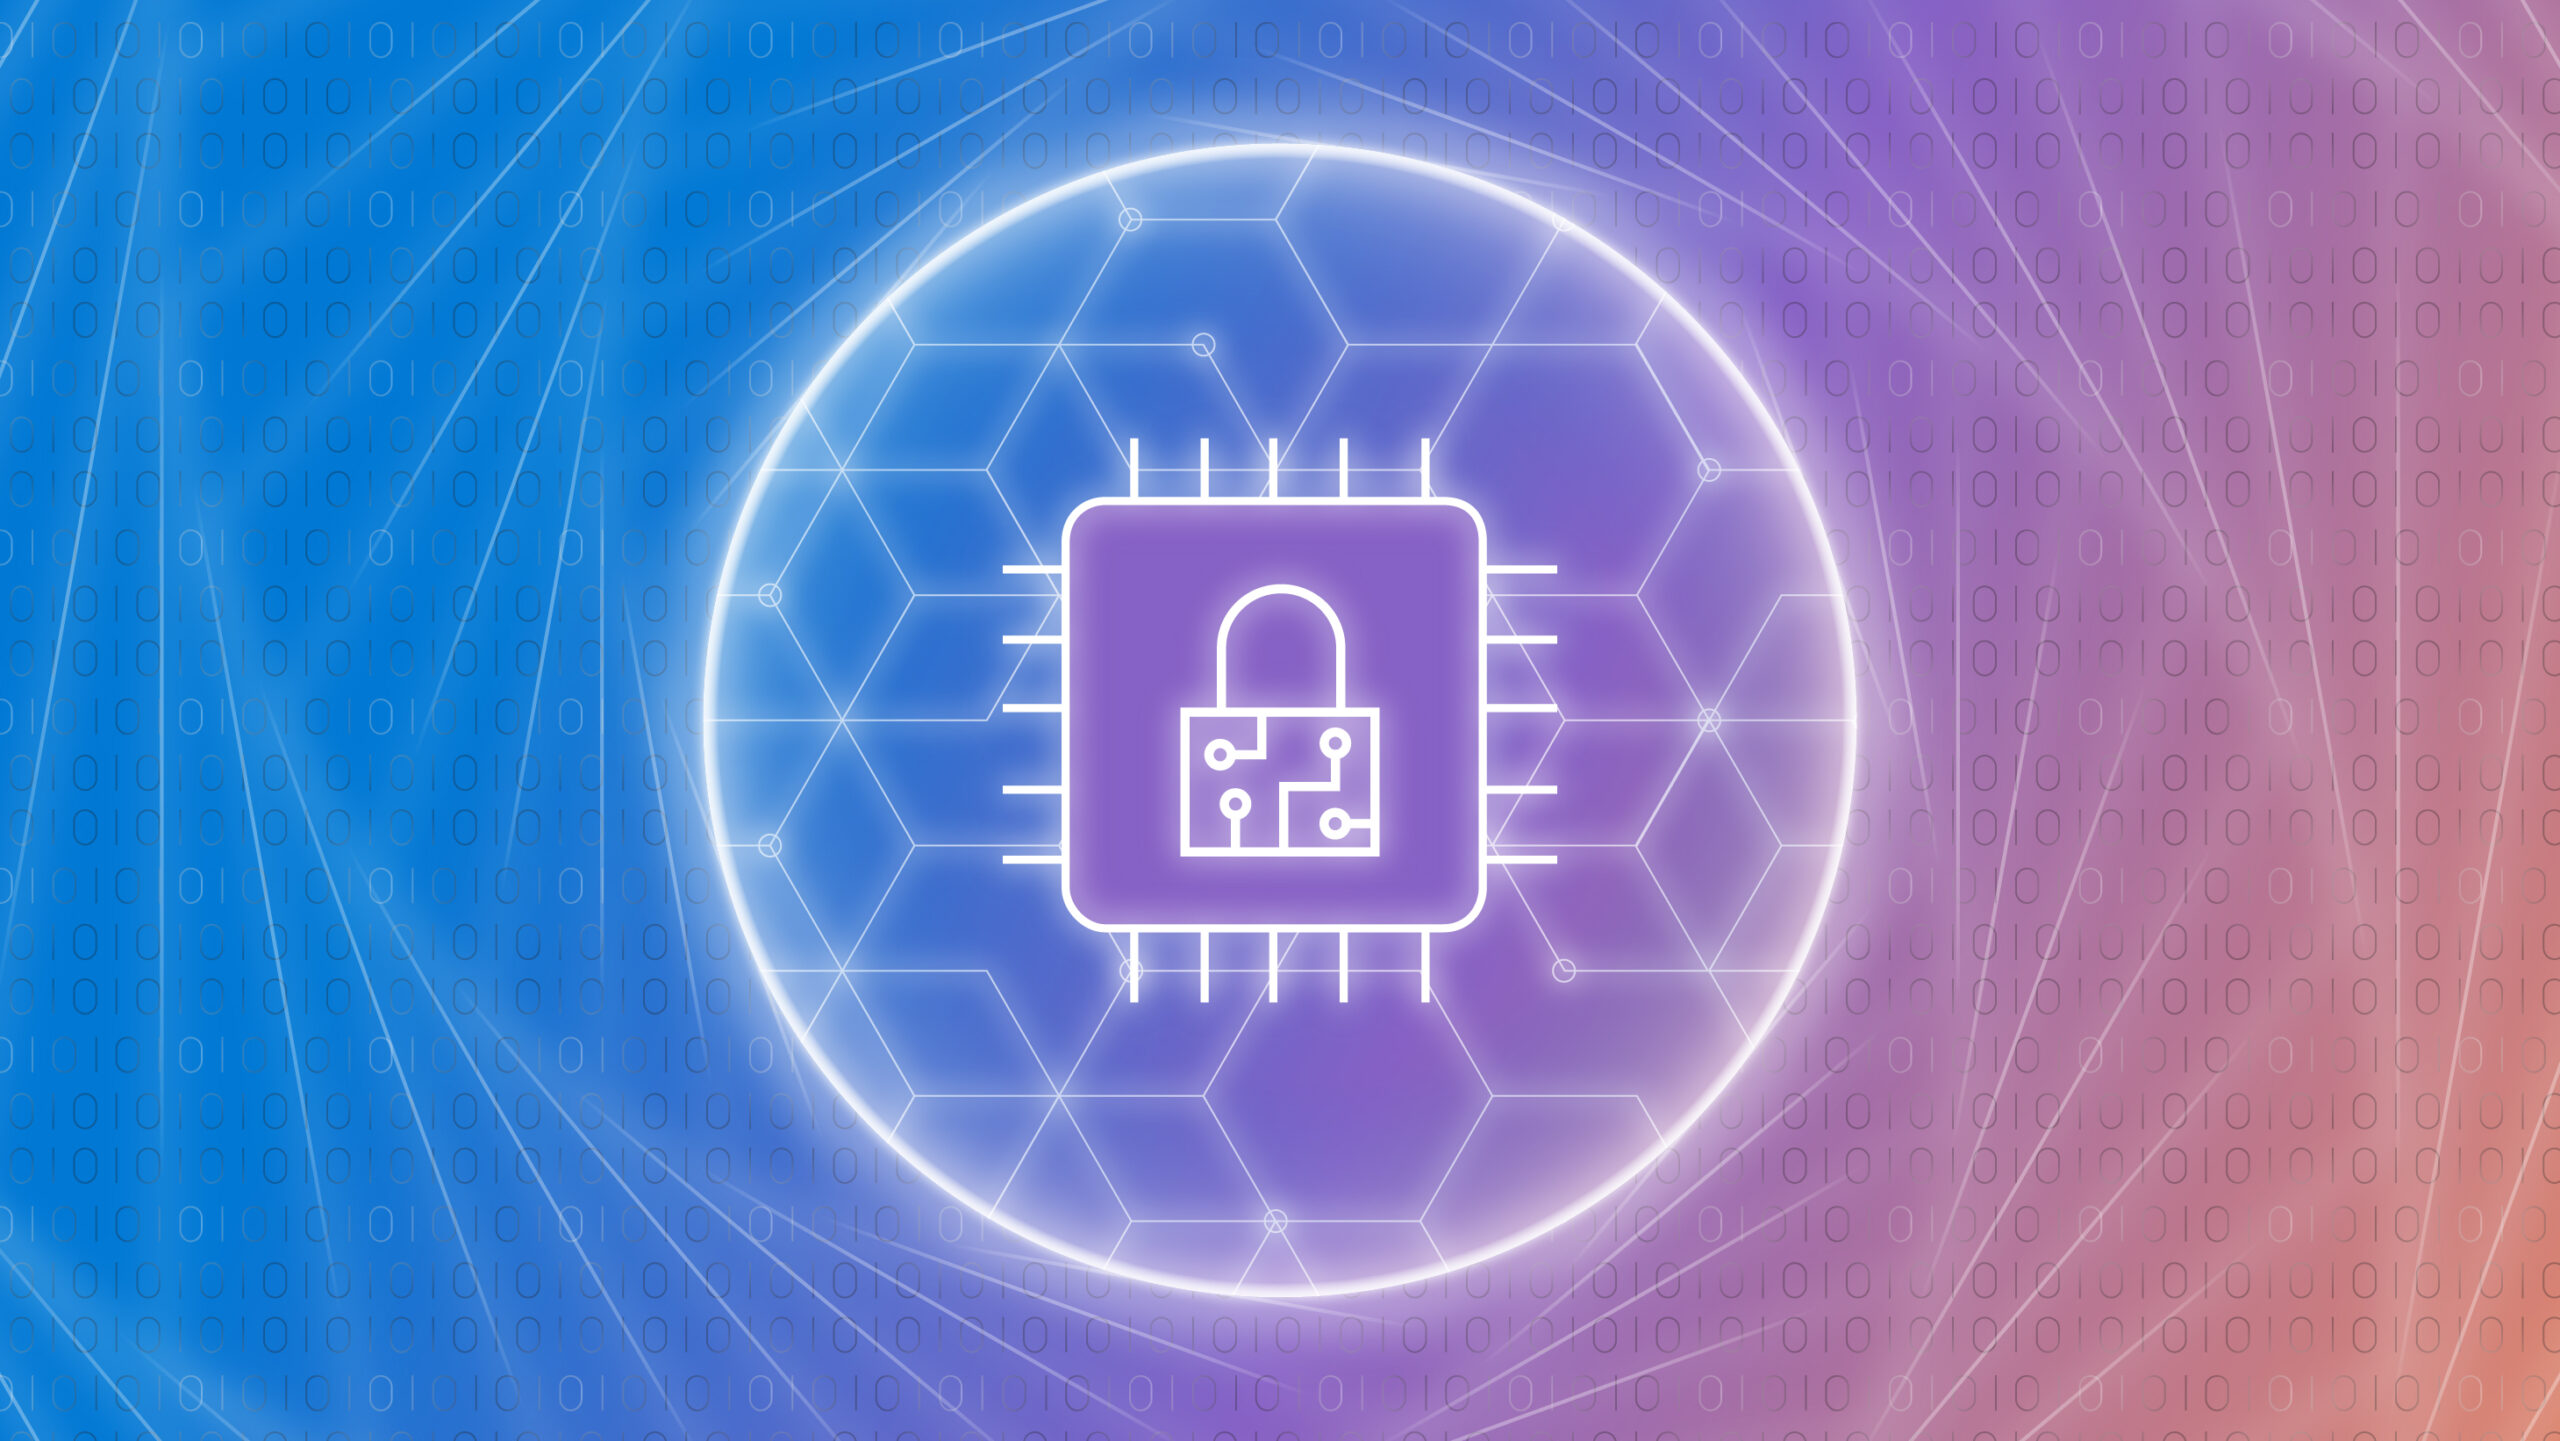 White lock within a geometric circle over top a blue to orange color gradient background